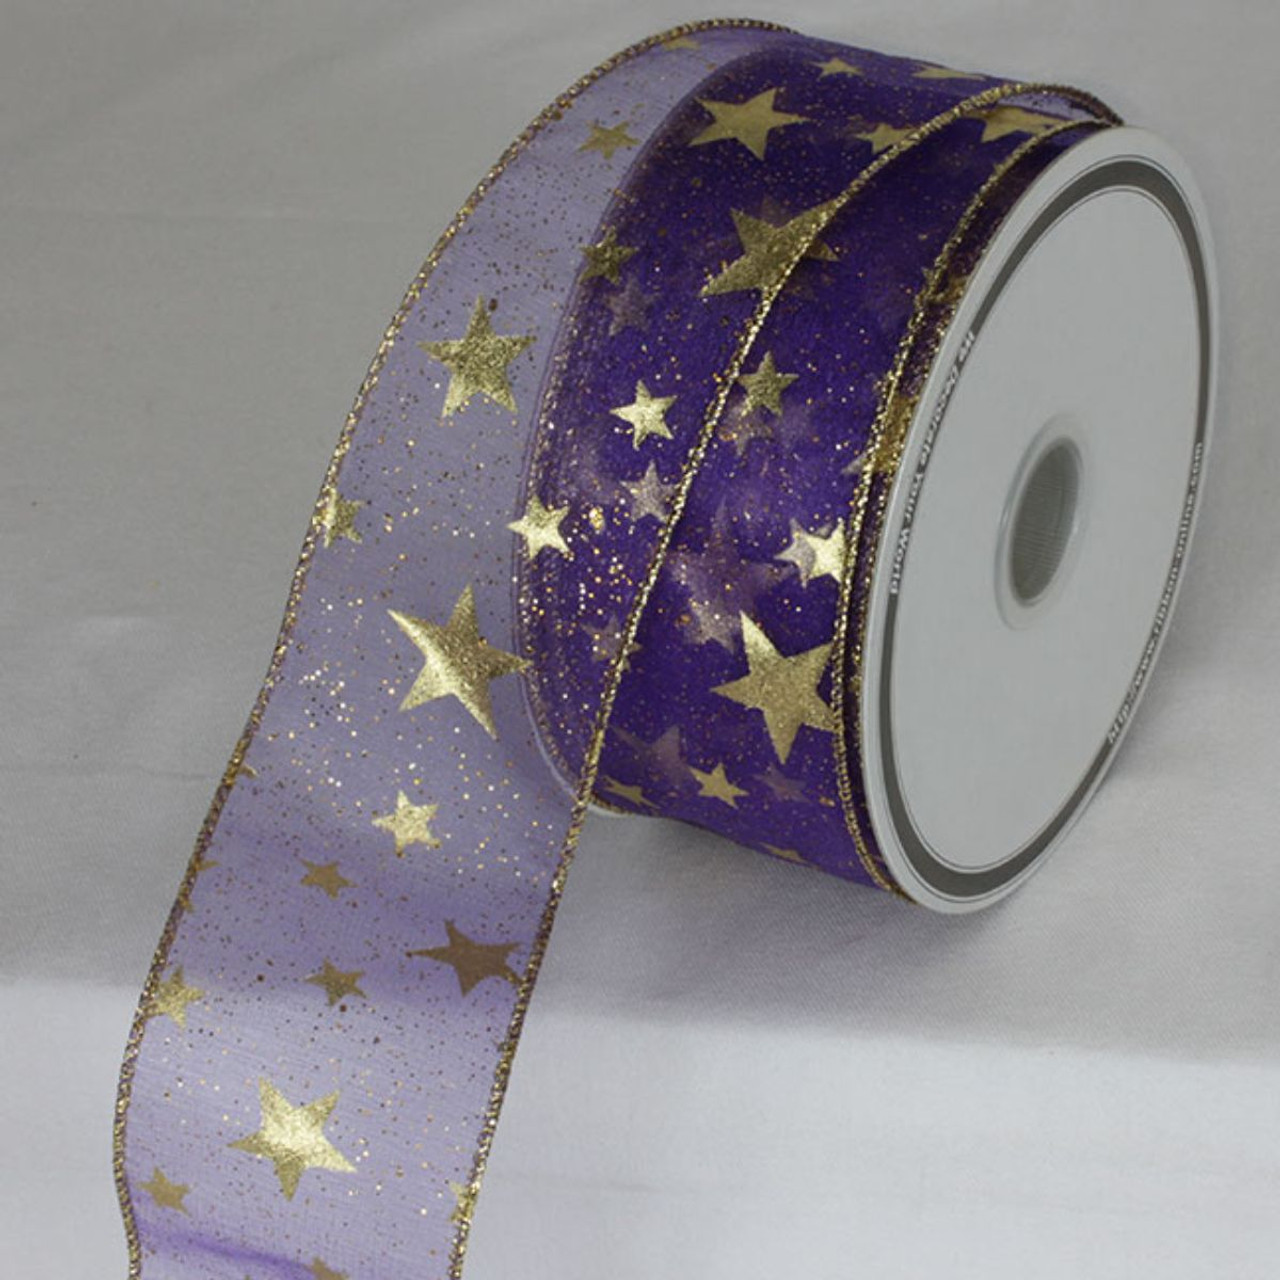 Purple Blue Ribbon for Gift Wrapping 2.5 x 10 Yards 3 Rolls,Wired